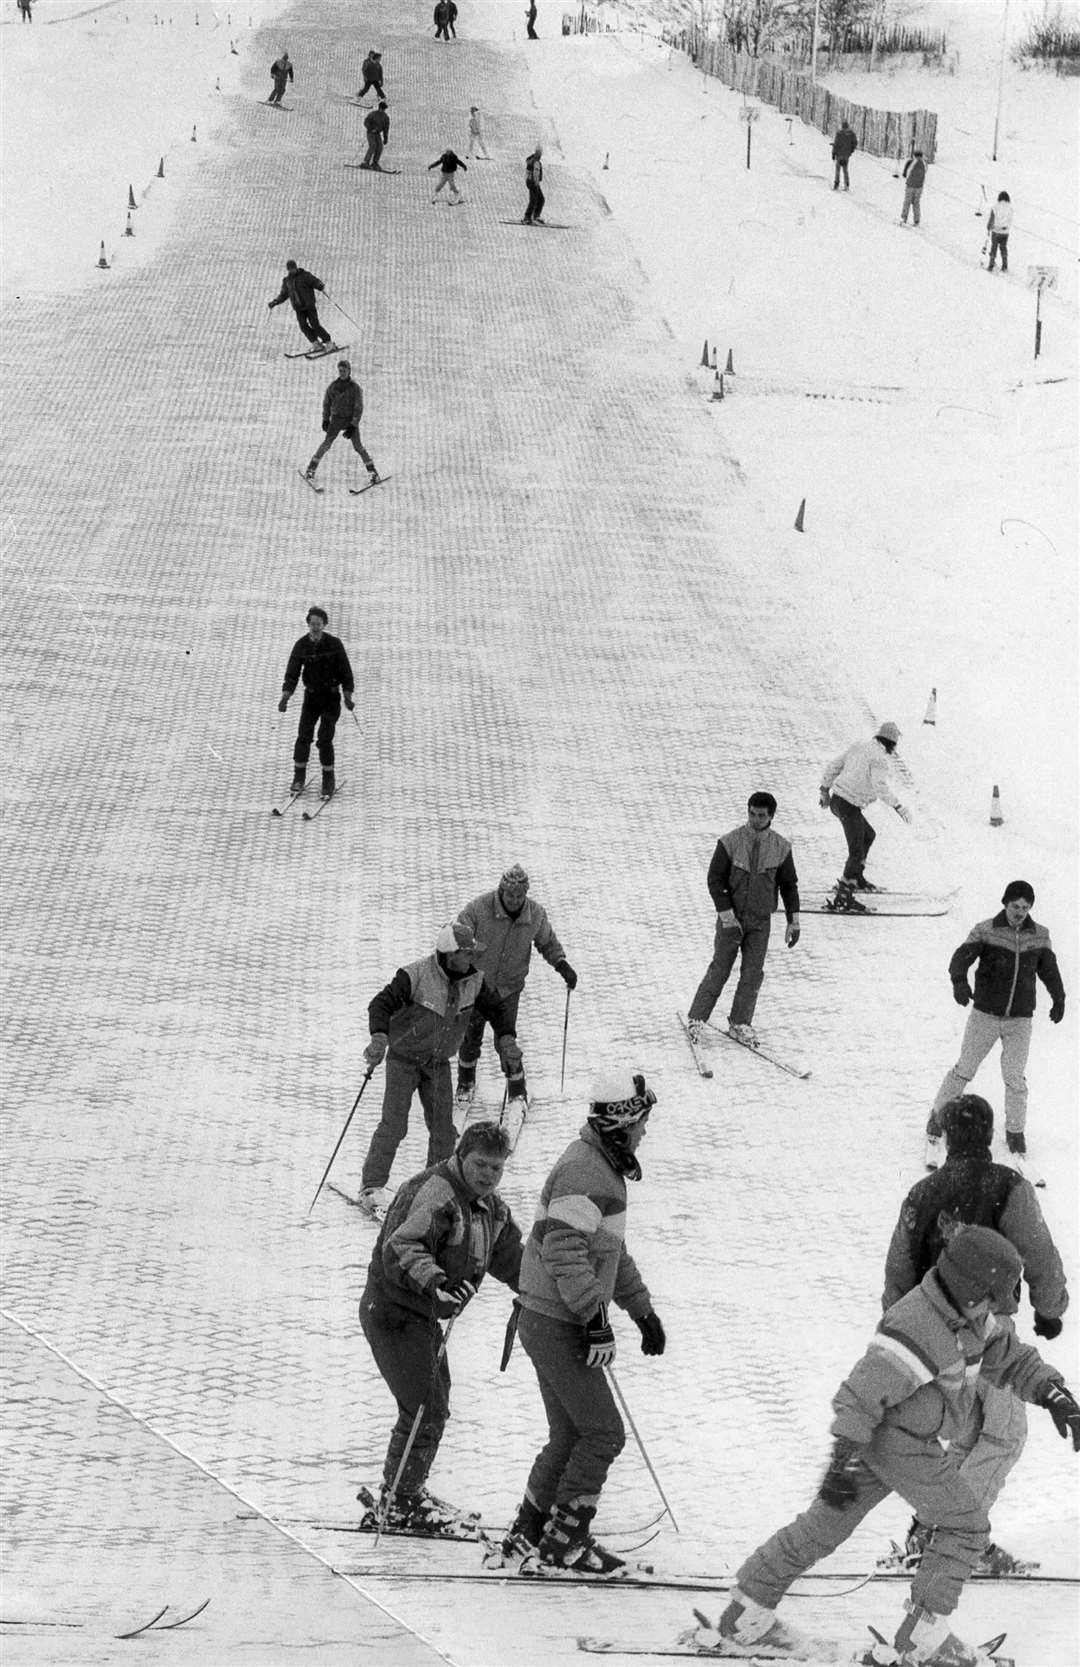 People enjoying real snow on the slopes of the Alpine Ski Centre in Chatham